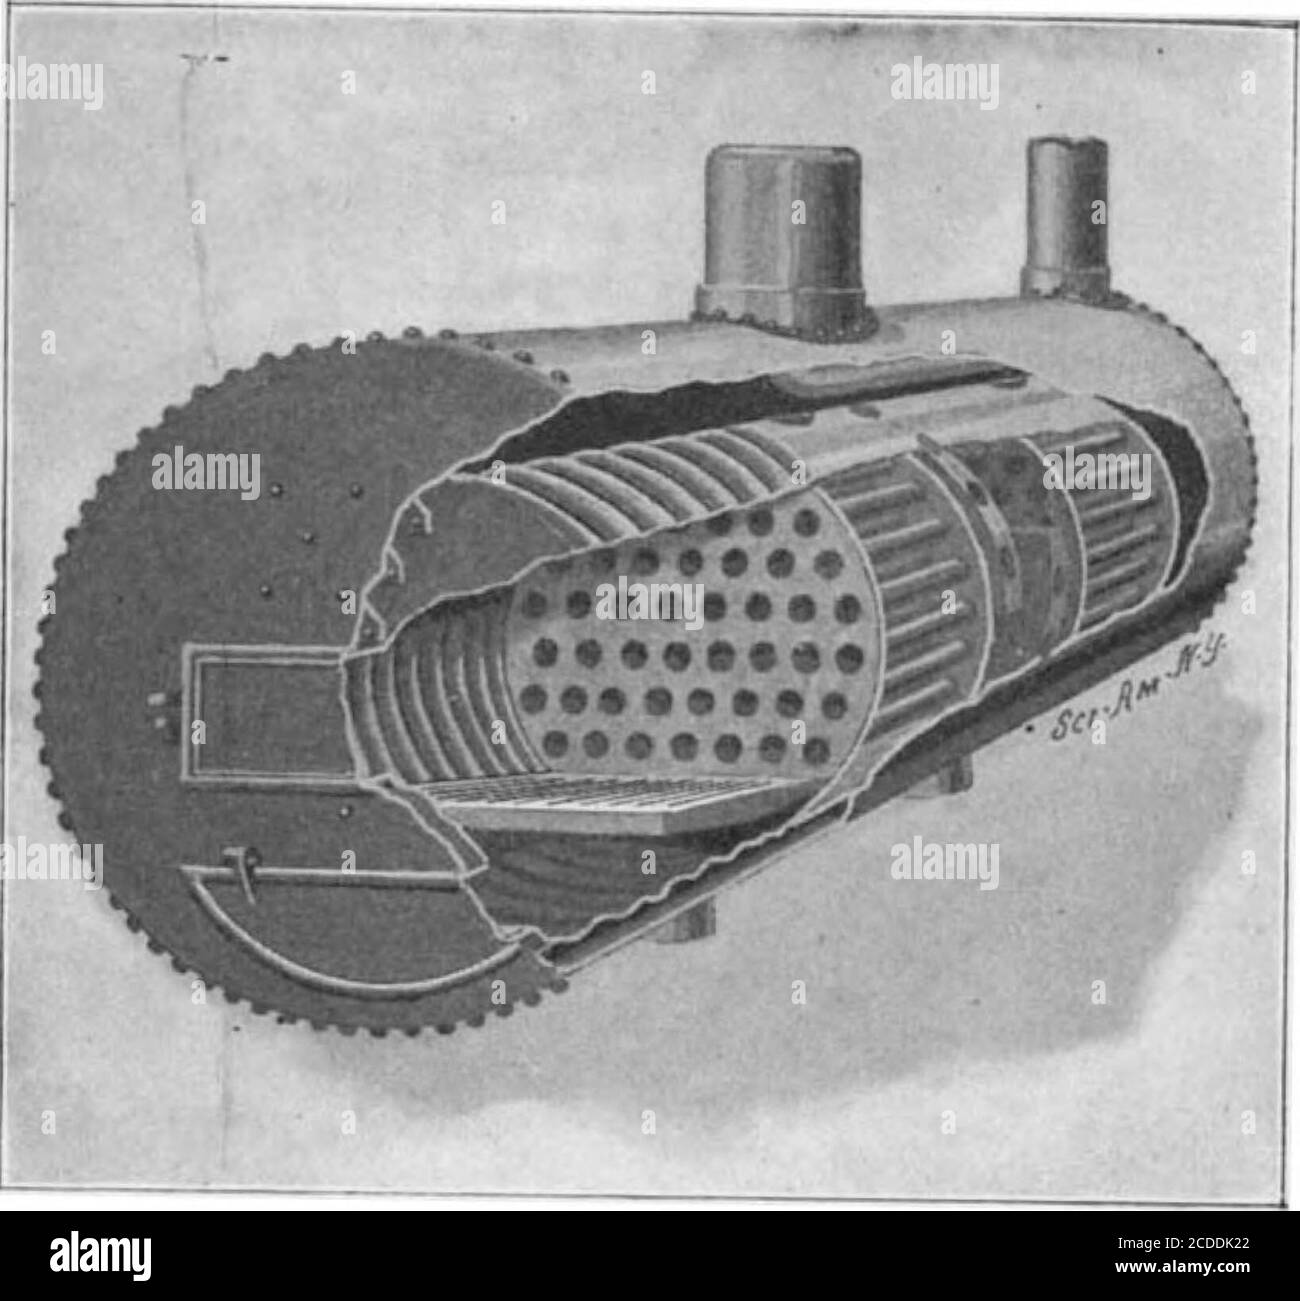 . Scientific American Volume 86 Number 14 (April 1902) . let which is pro-vided with a valve under the control of the engineer.A similar inlet is located in the auxiliary combus-tion chamber. The smoke and gases, passing throughthe first set of flues, enter the auxiliary combustionchamber, and after passing downward under the firstdeflector and upward over the second, continuethrough the next set of flues to the firebox. It is evident that this arrangement provides a largeheating surface resulting in greater economy in theconsumption of the fuel. There is a complete circula-tion of water, whic Stock Photo